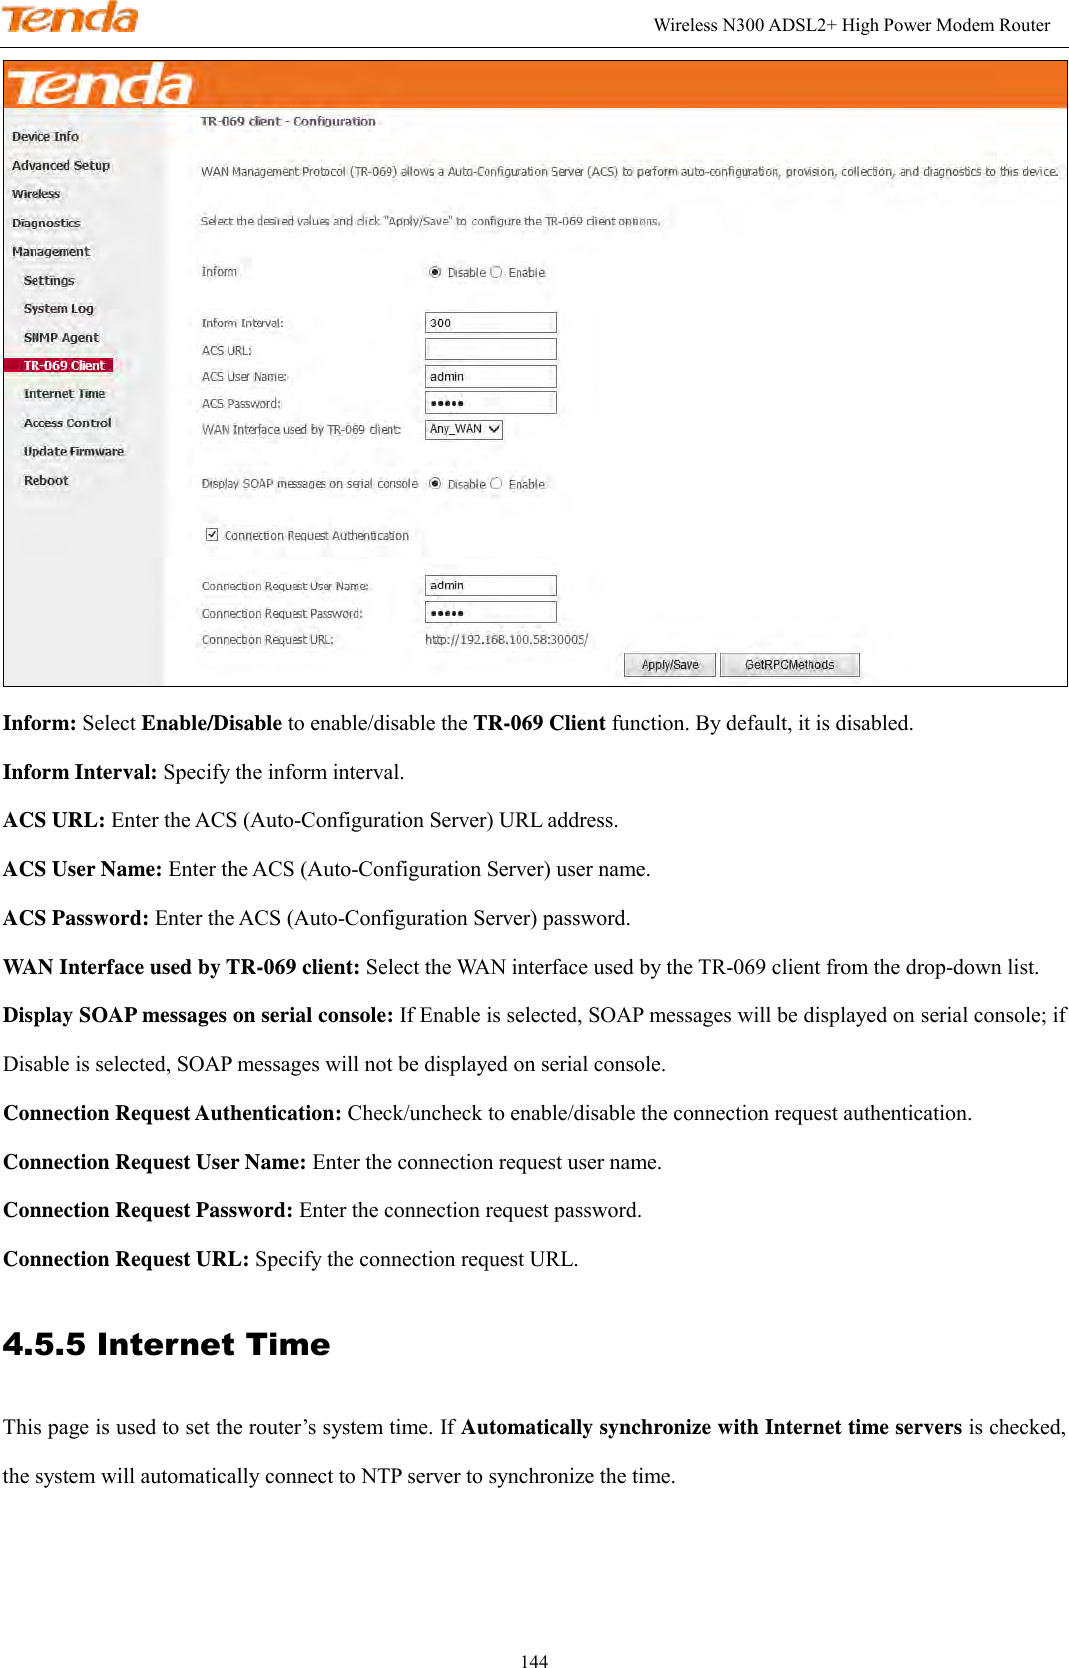                                                                                                               Wireless N300 ADSL2+ High Power Modem Router 144  Inform: Select Enable/Disable to enable/disable the TR-069 Client function. By default, it is disabled. Inform Interval: Specify the inform interval. ACS URL: Enter the ACS (Auto-Configuration Server) URL address.   ACS User Name: Enter the ACS (Auto-Configuration Server) user name.       ACS Password: Enter the ACS (Auto-Configuration Server) password.       WAN Interface used by TR-069 client: Select the WAN interface used by the TR-069 client from the drop-down list.     Display SOAP messages on serial console: If Enable is selected, SOAP messages will be displayed on serial console; if Disable is selected, SOAP messages will not be displayed on serial console.     Connection Request Authentication: Check/uncheck to enable/disable the connection request authentication.    Connection Request User Name: Enter the connection request user name.   Connection Request Password: Enter the connection request password.   Connection Request URL: Specify the connection request URL. 4.5.5 Internet Time This page is used to set the router’s system time. If Automatically synchronize with Internet time servers is checked, the system will automatically connect to NTP server to synchronize the time.   